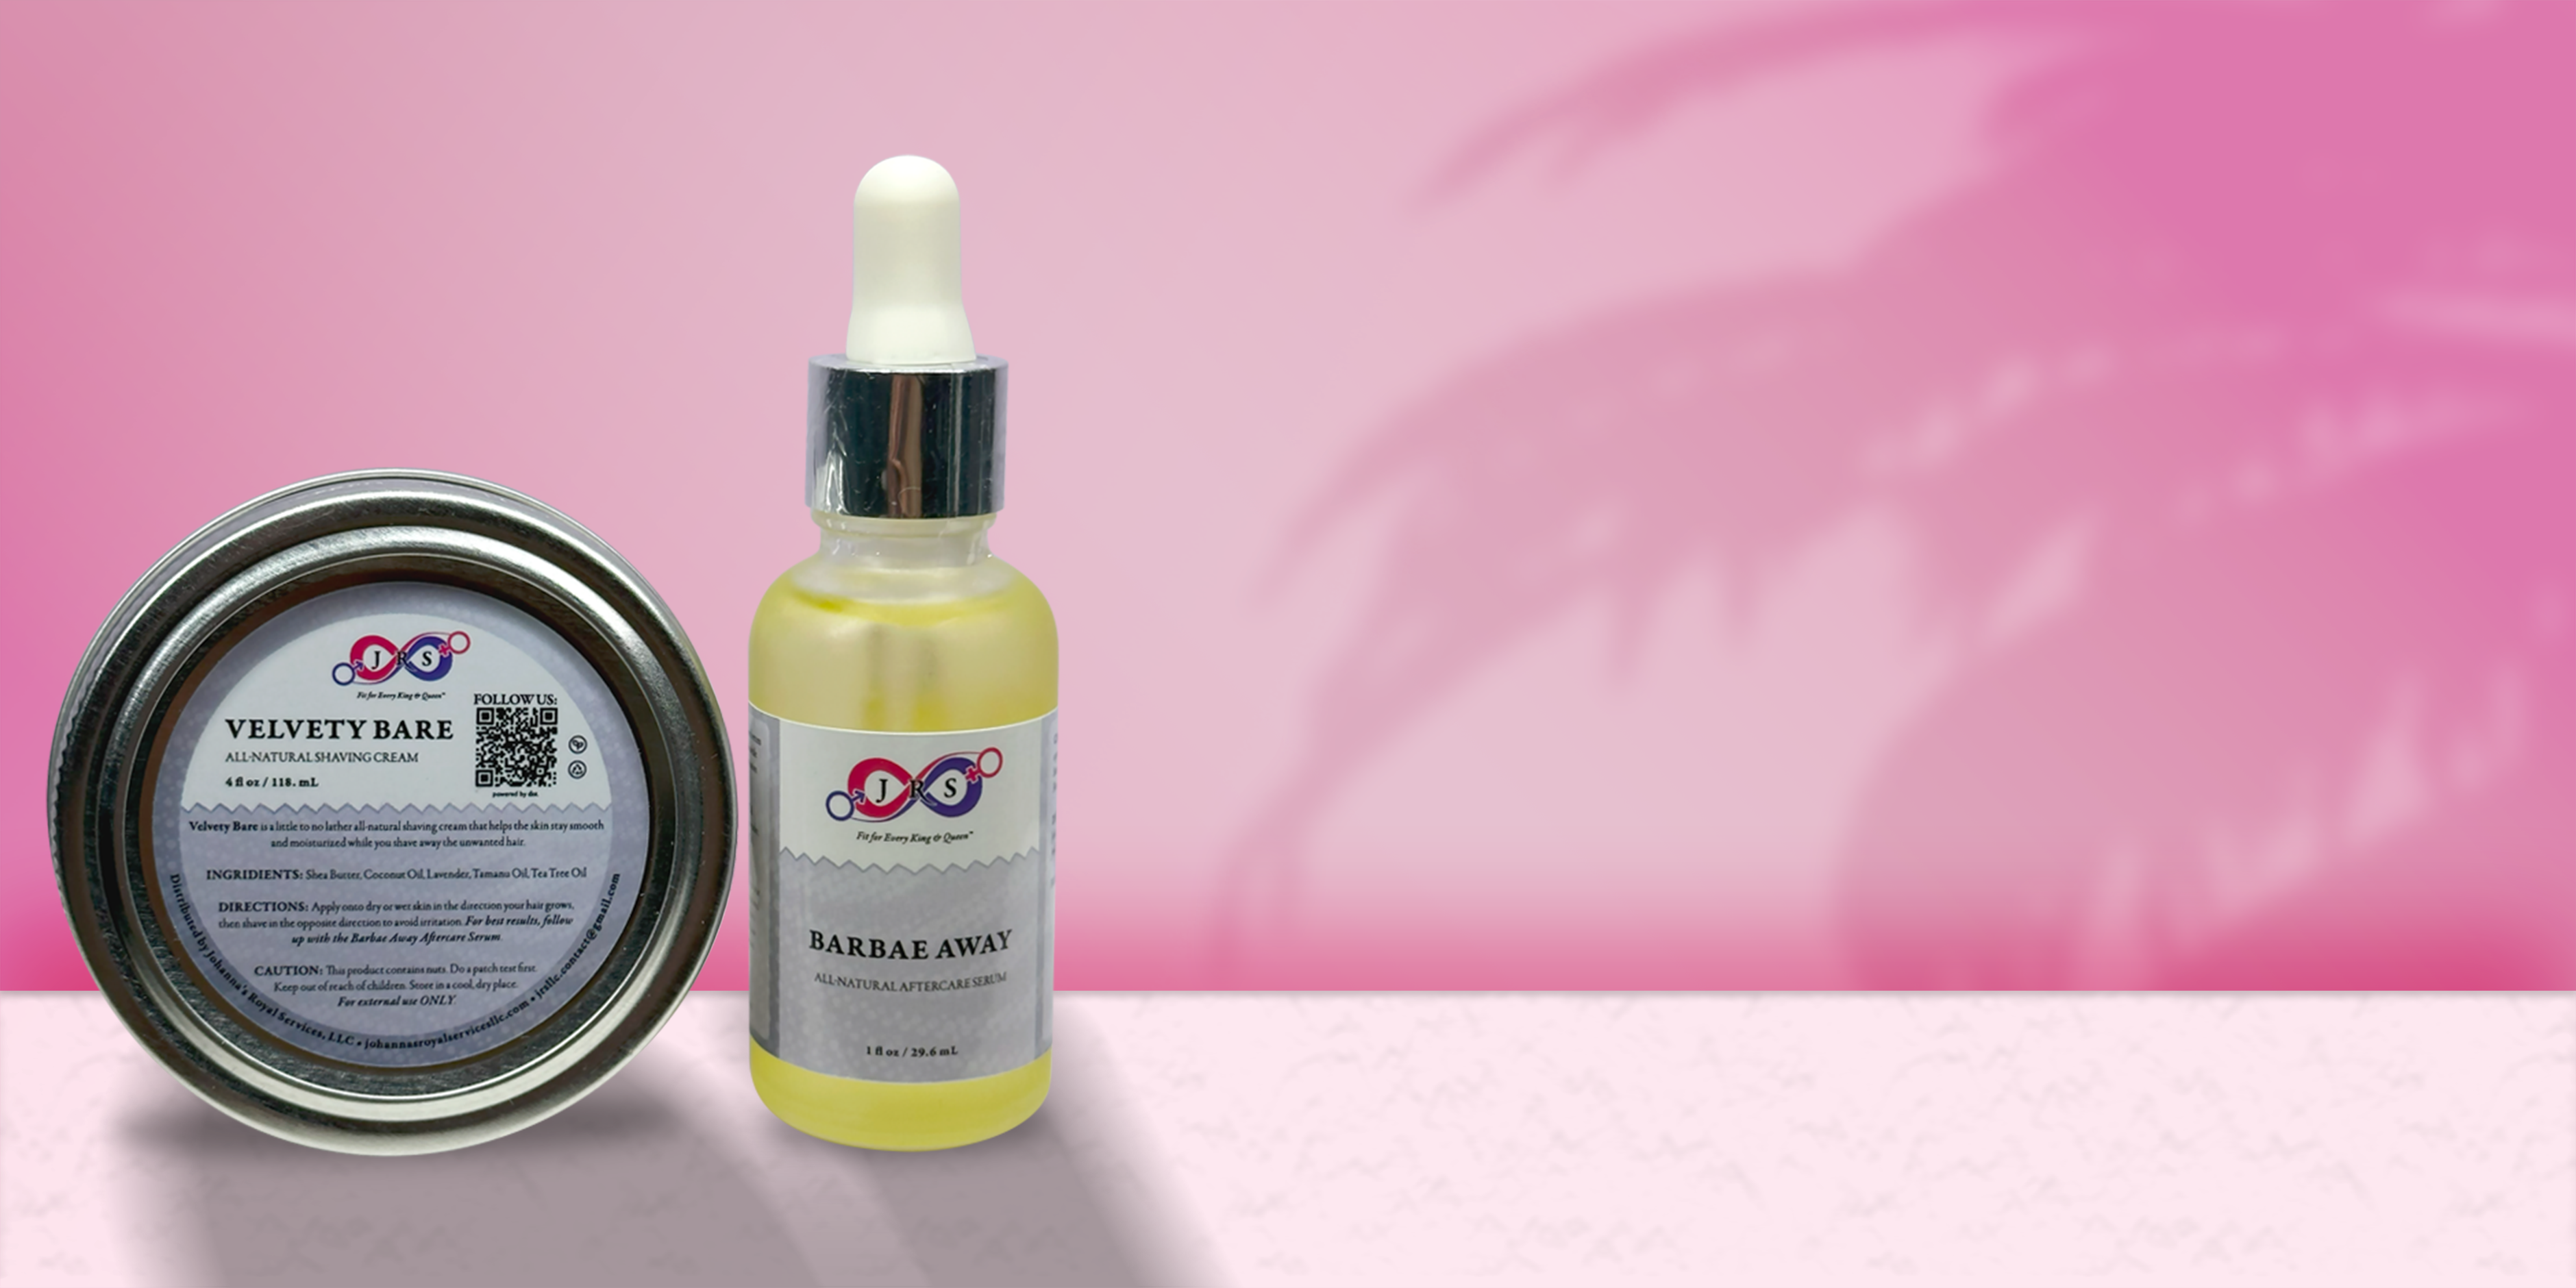 Image of Velvety Bare Shaving Cream and Barbae Away Serum over a pink colored background